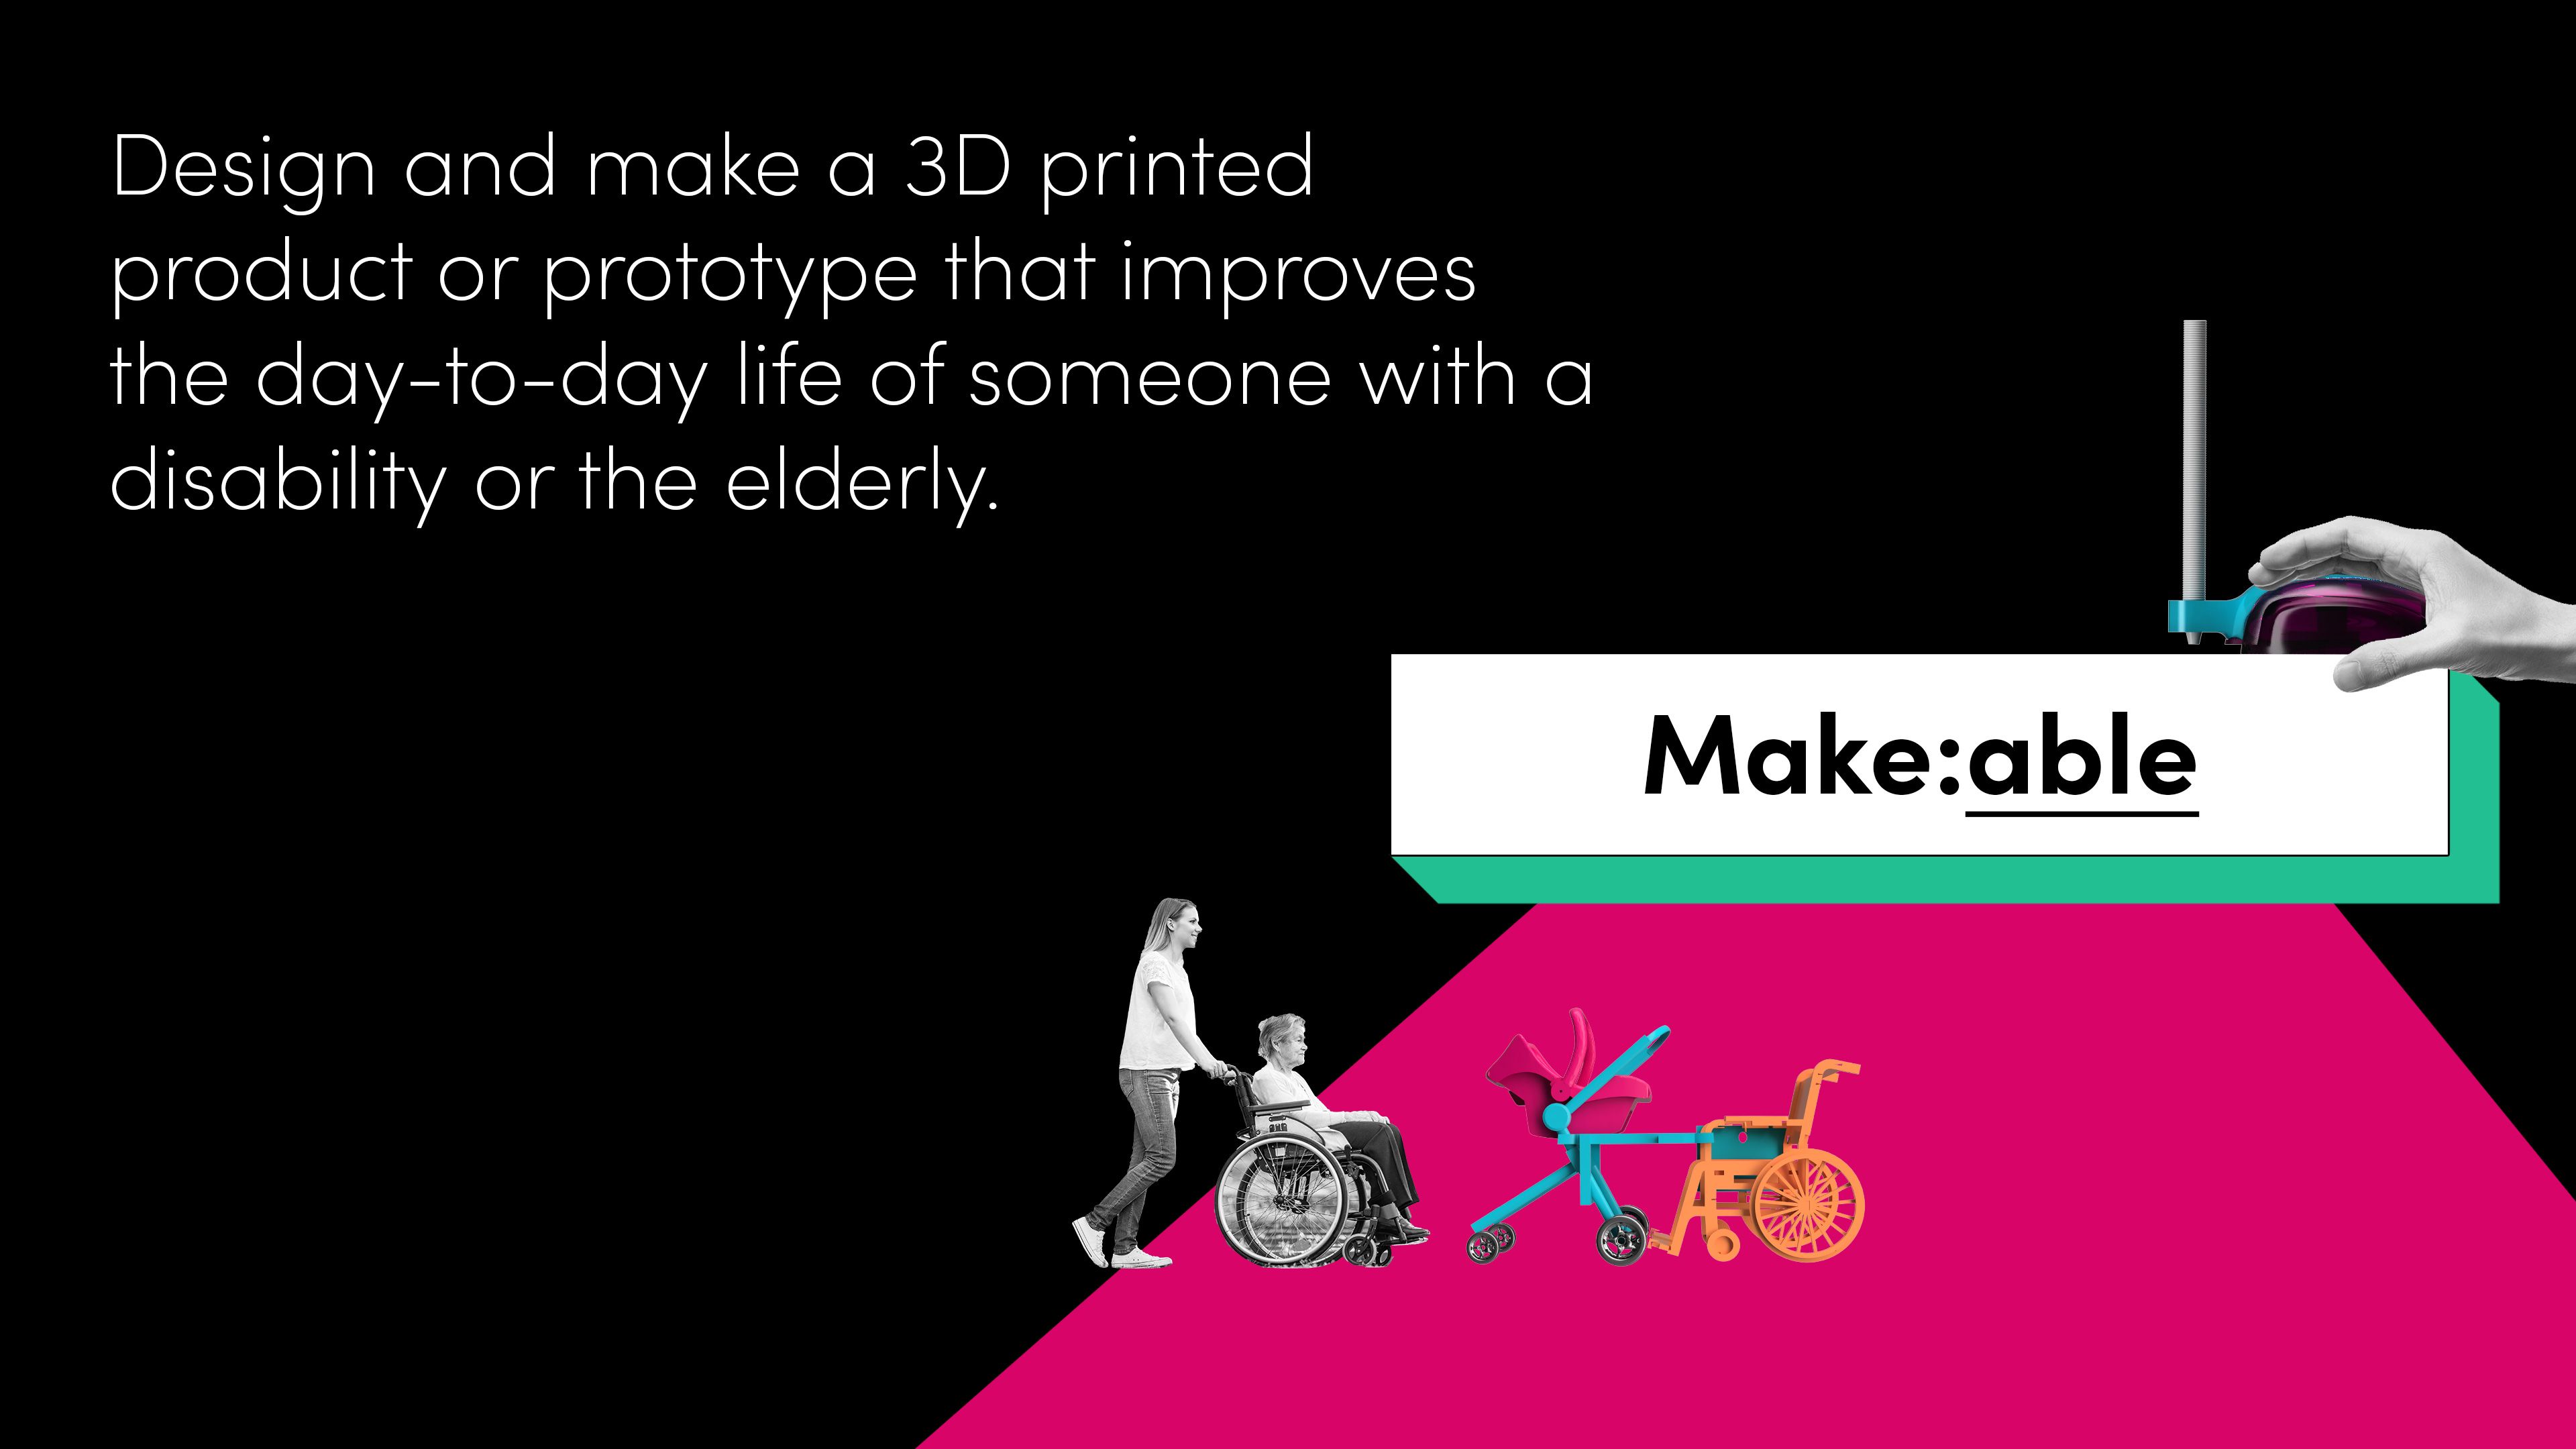 Make:able Challenge graphic that says "Design and make a 3D printed product or prototype that improves the day-to-day life of someone with a disability of the elderly".